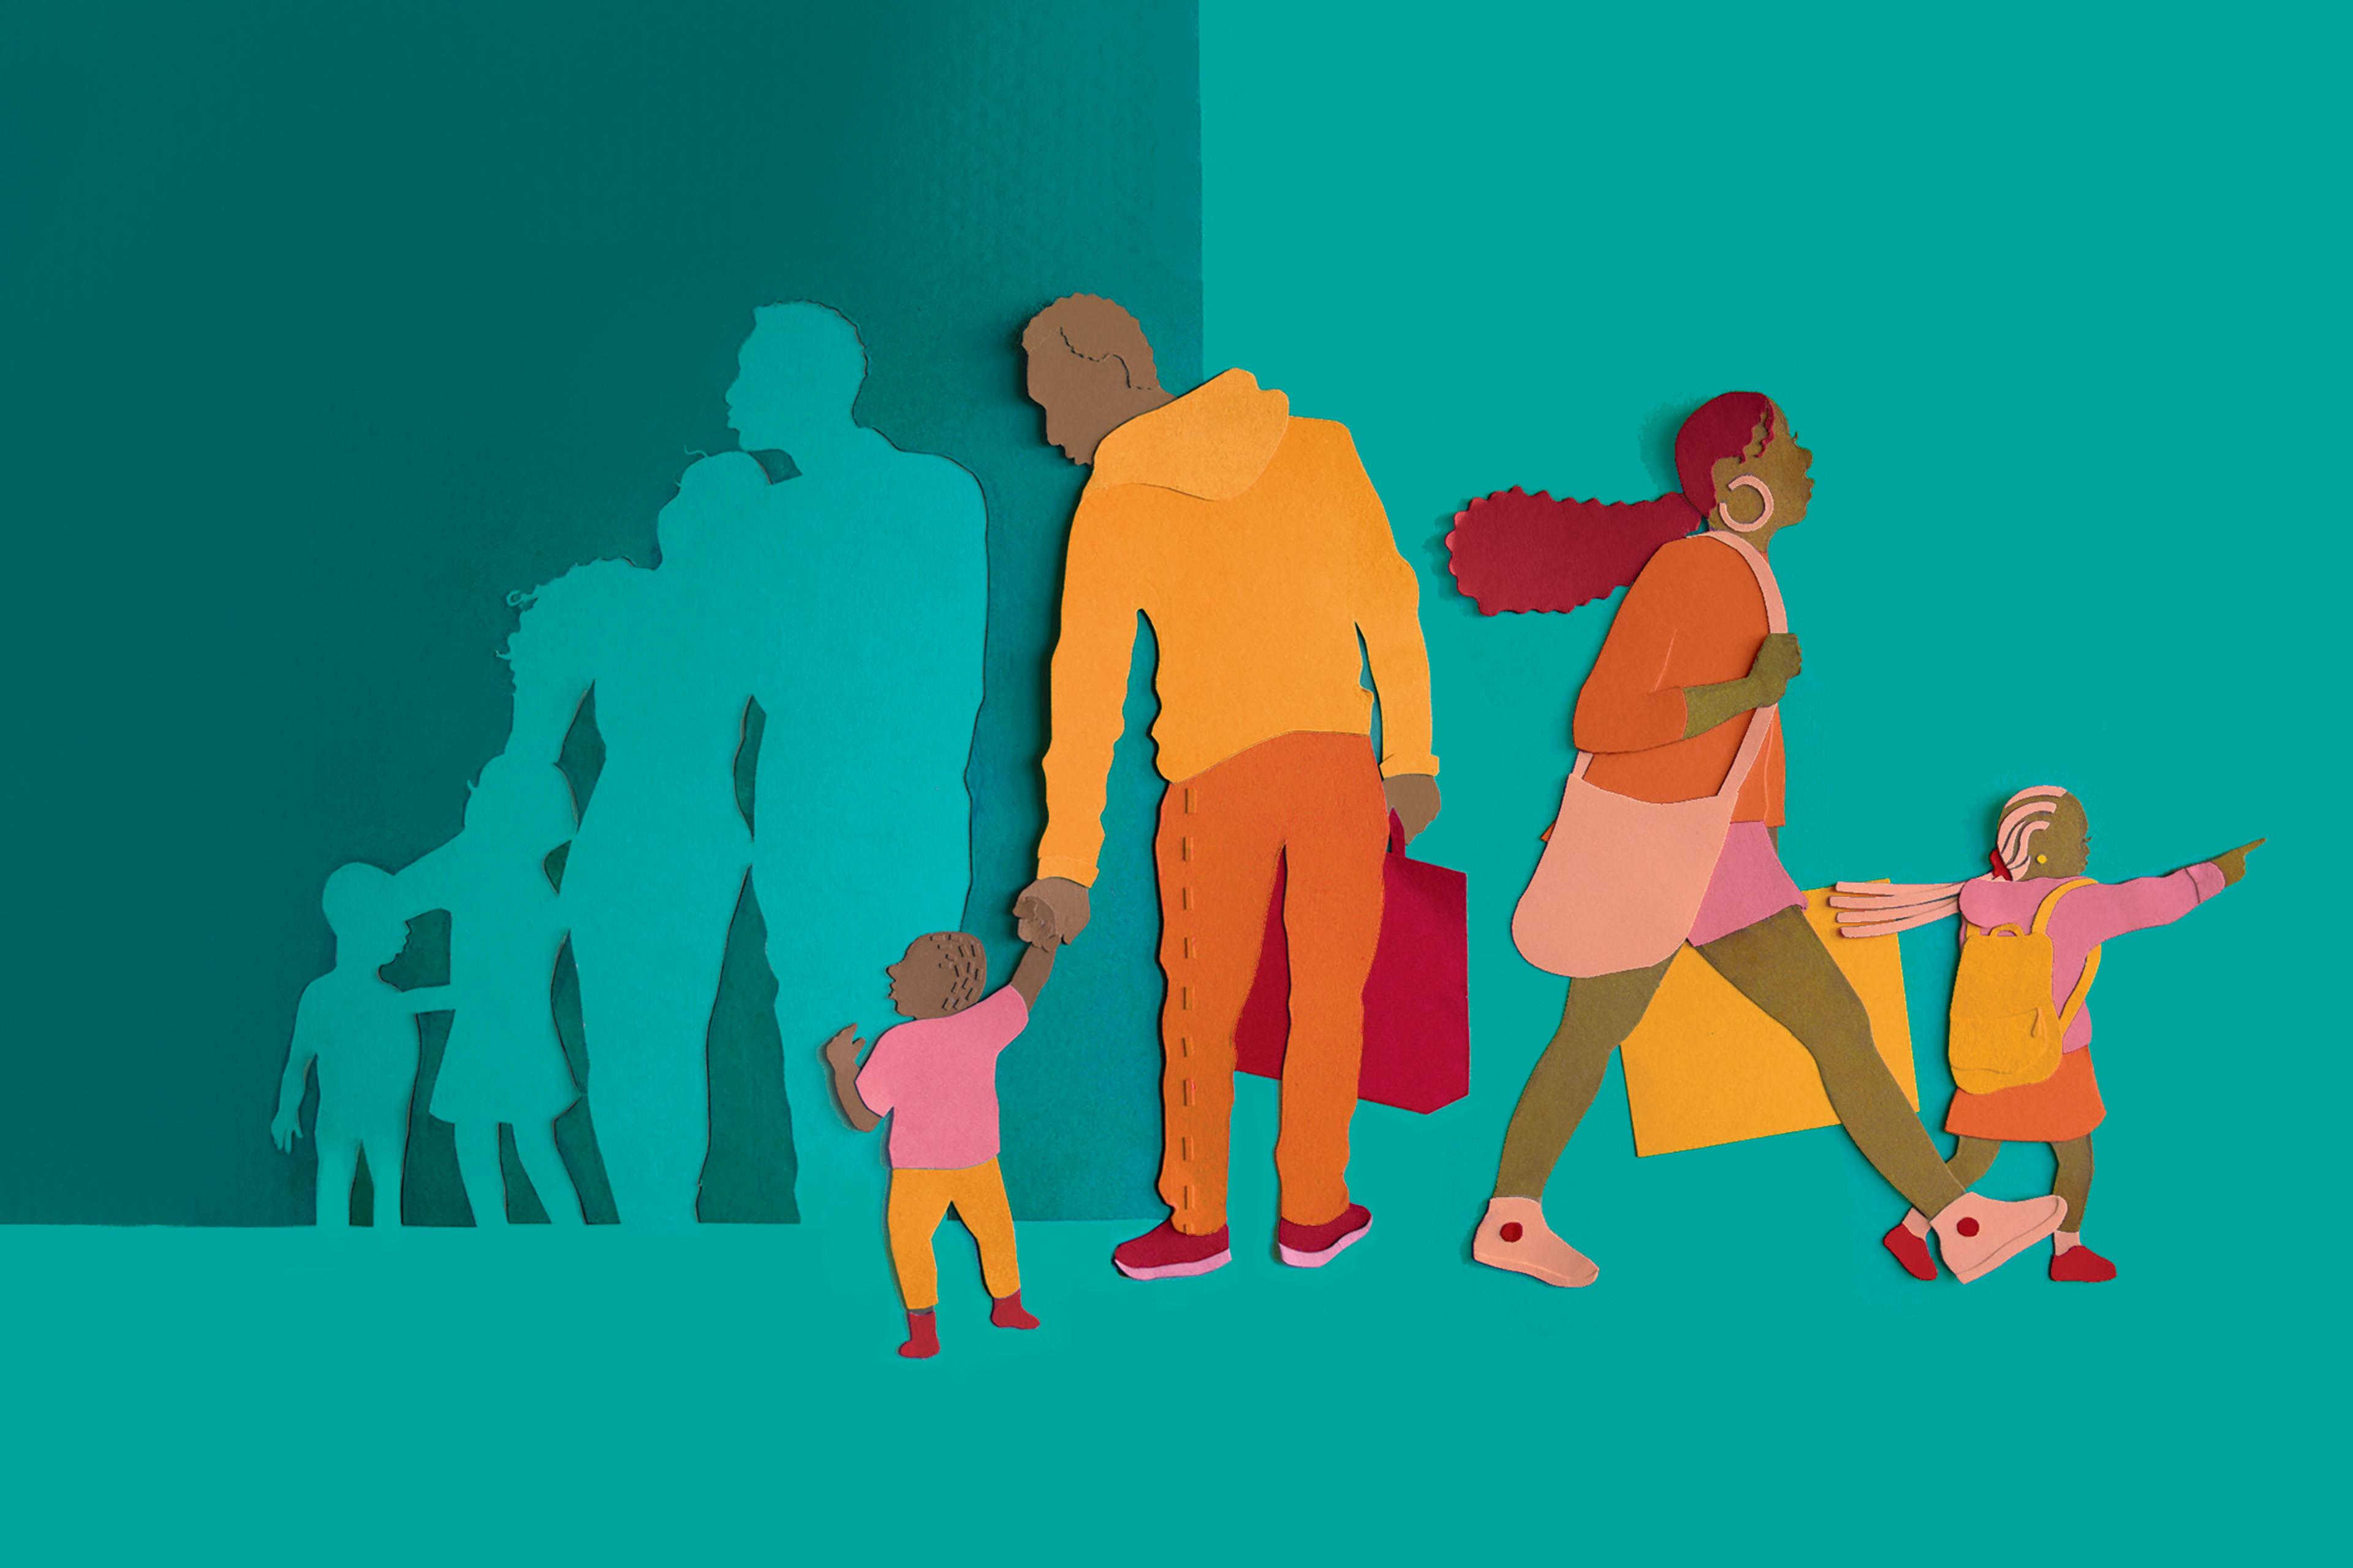 Collage with a bright teal background with a family with a mum, dad and two young children portrayed in bright orange and pink cut-outs